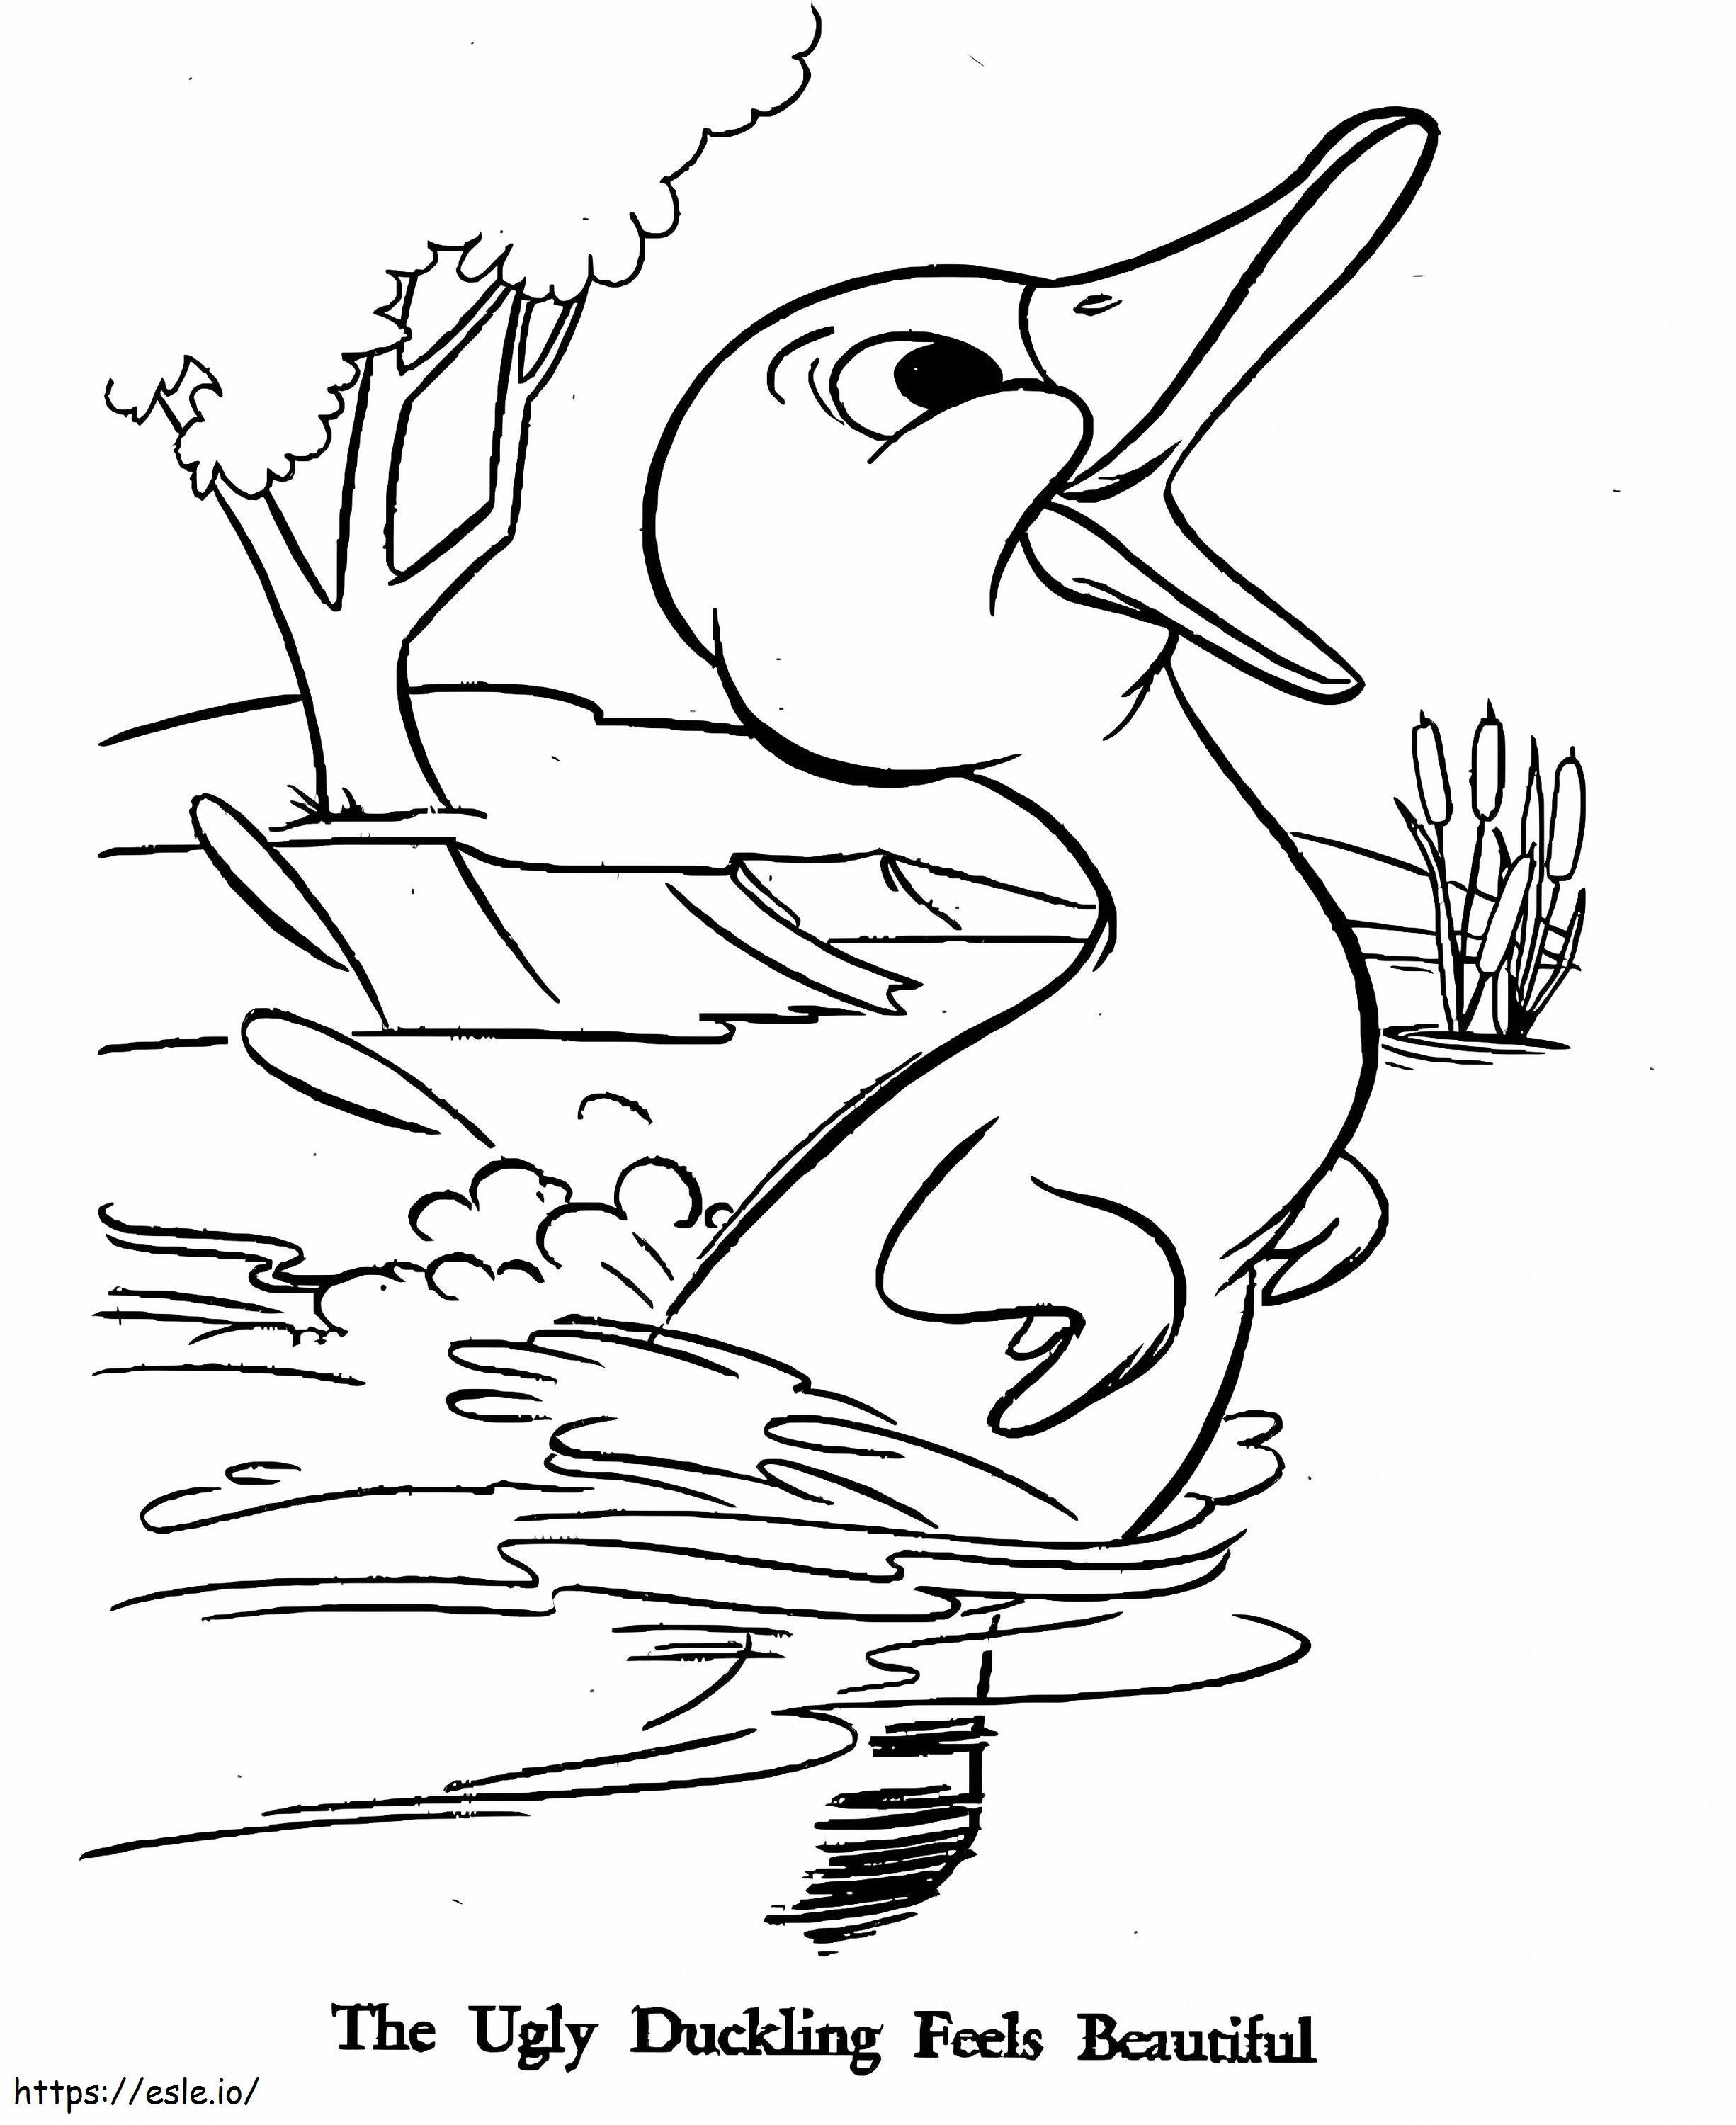 The Ugly Duckling Feels Beautiful coloring page